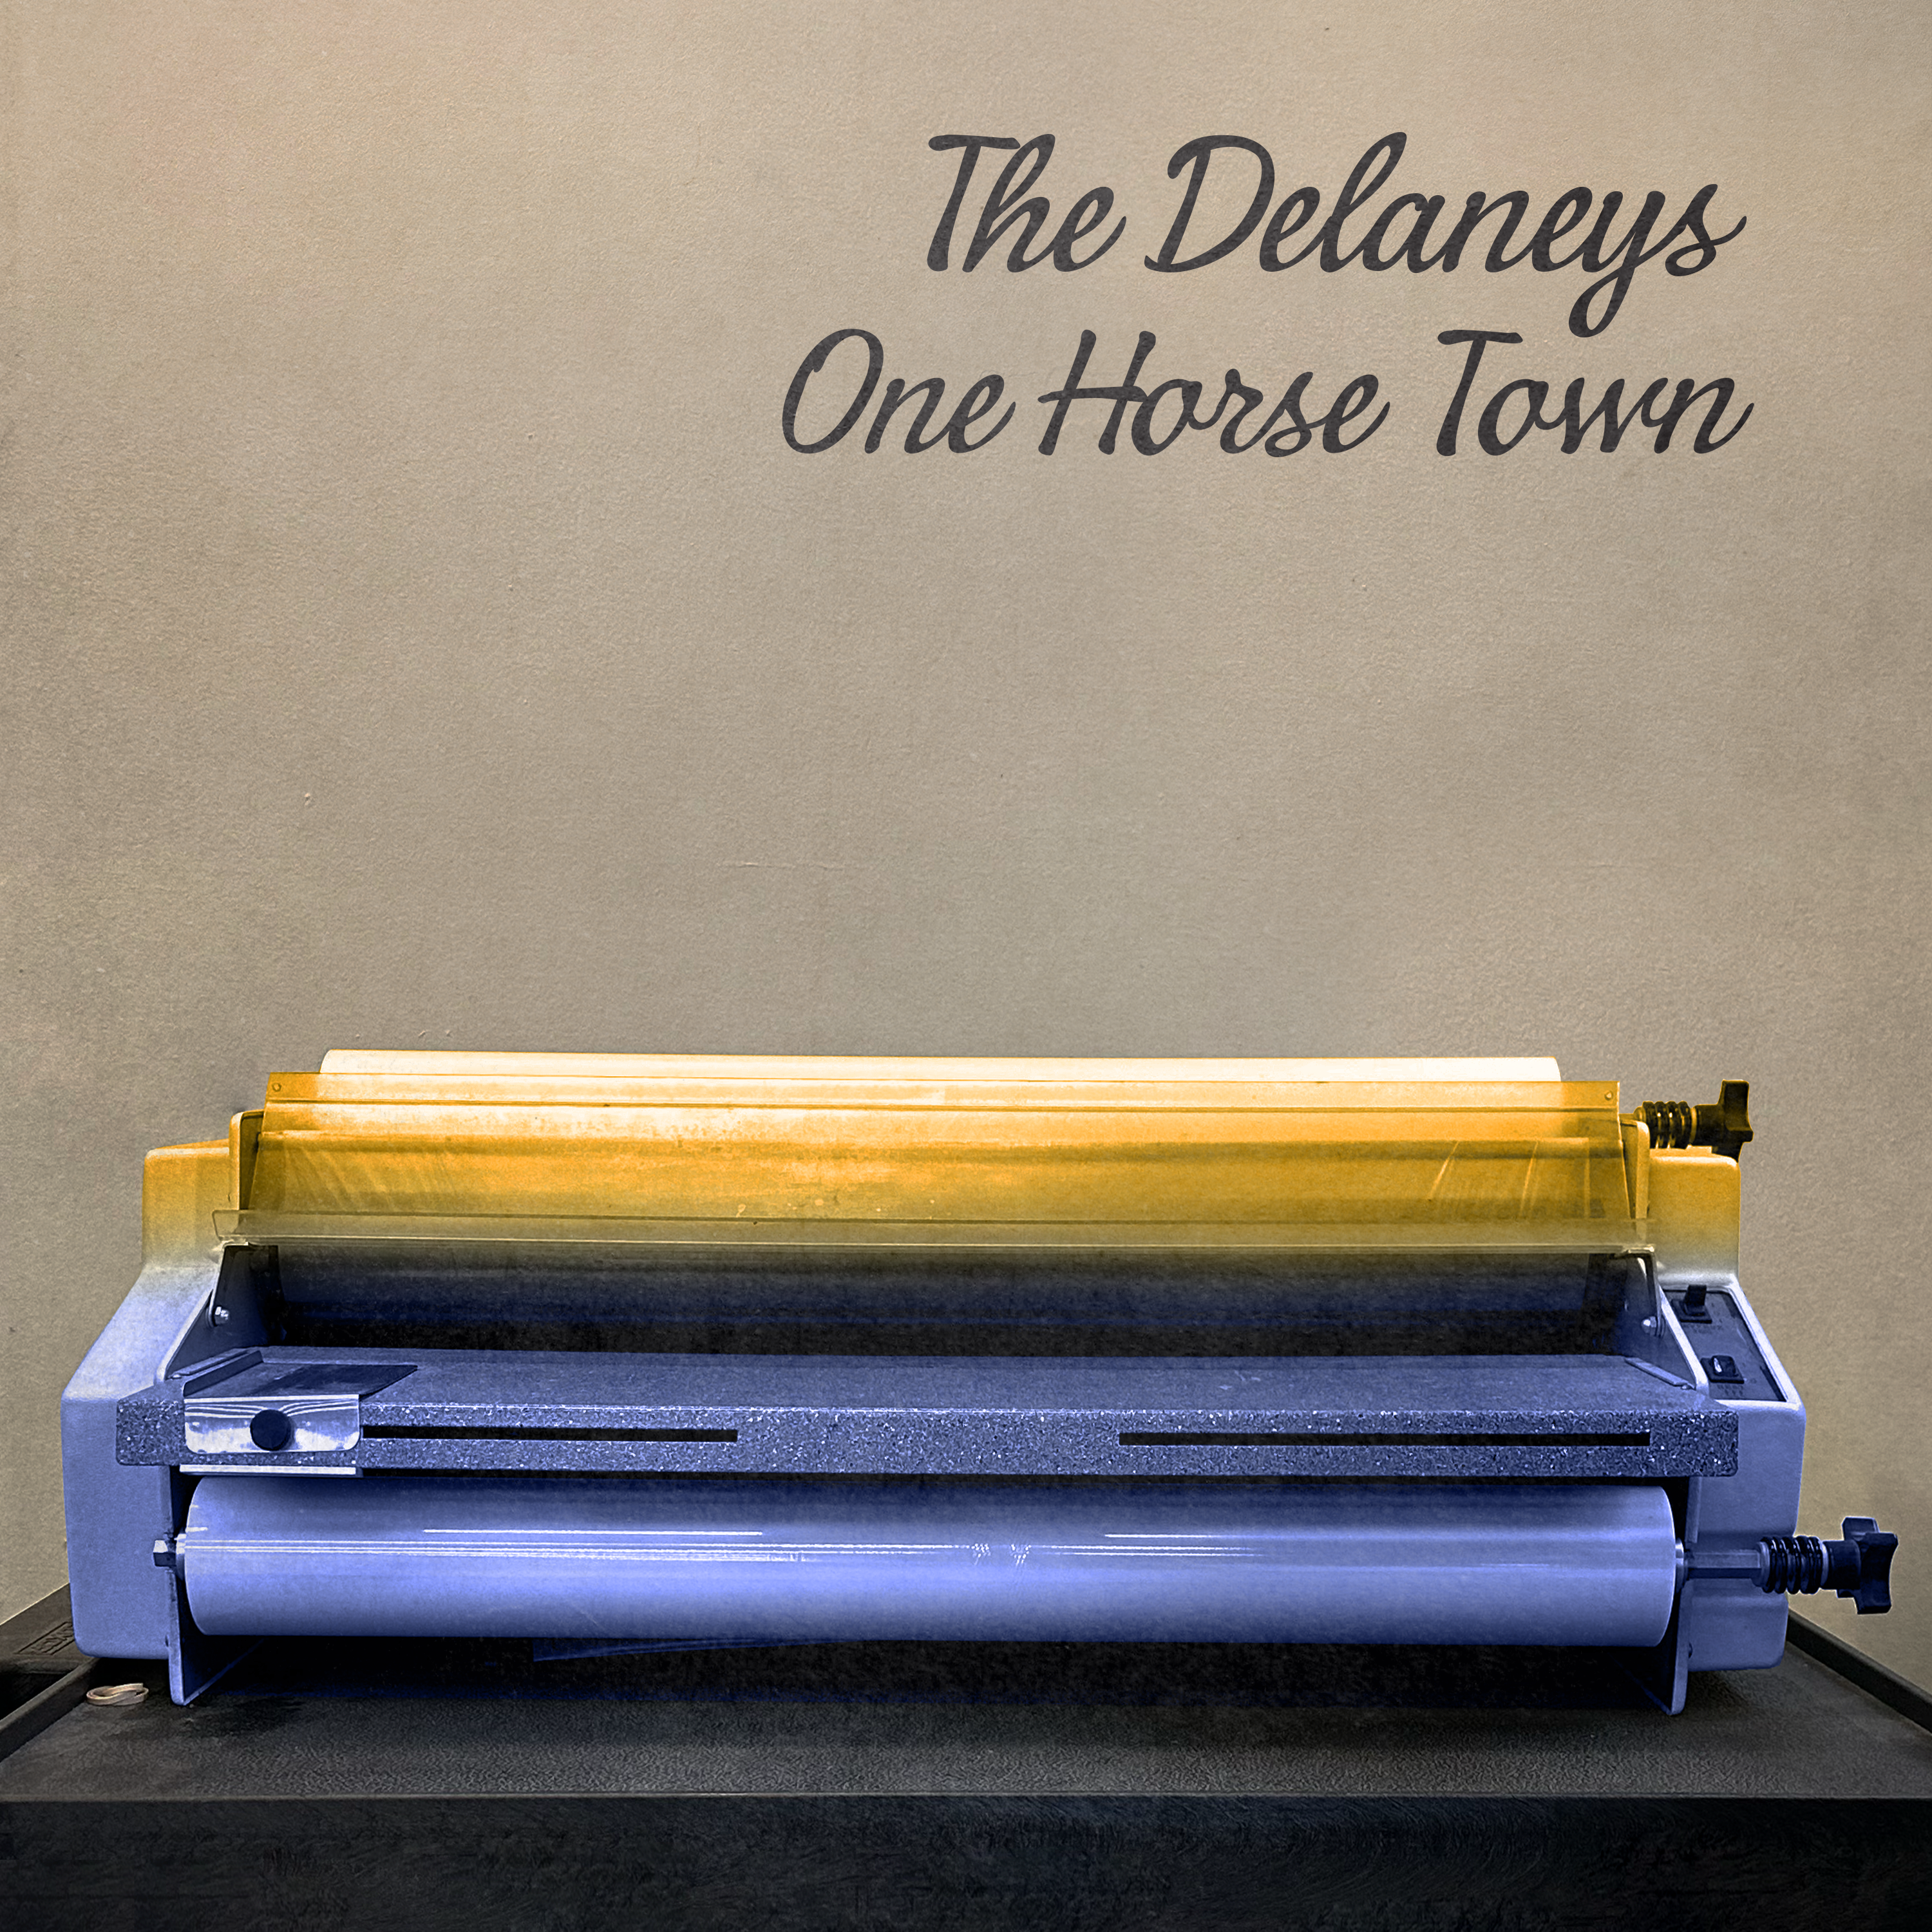 Delaneys One Horse Town